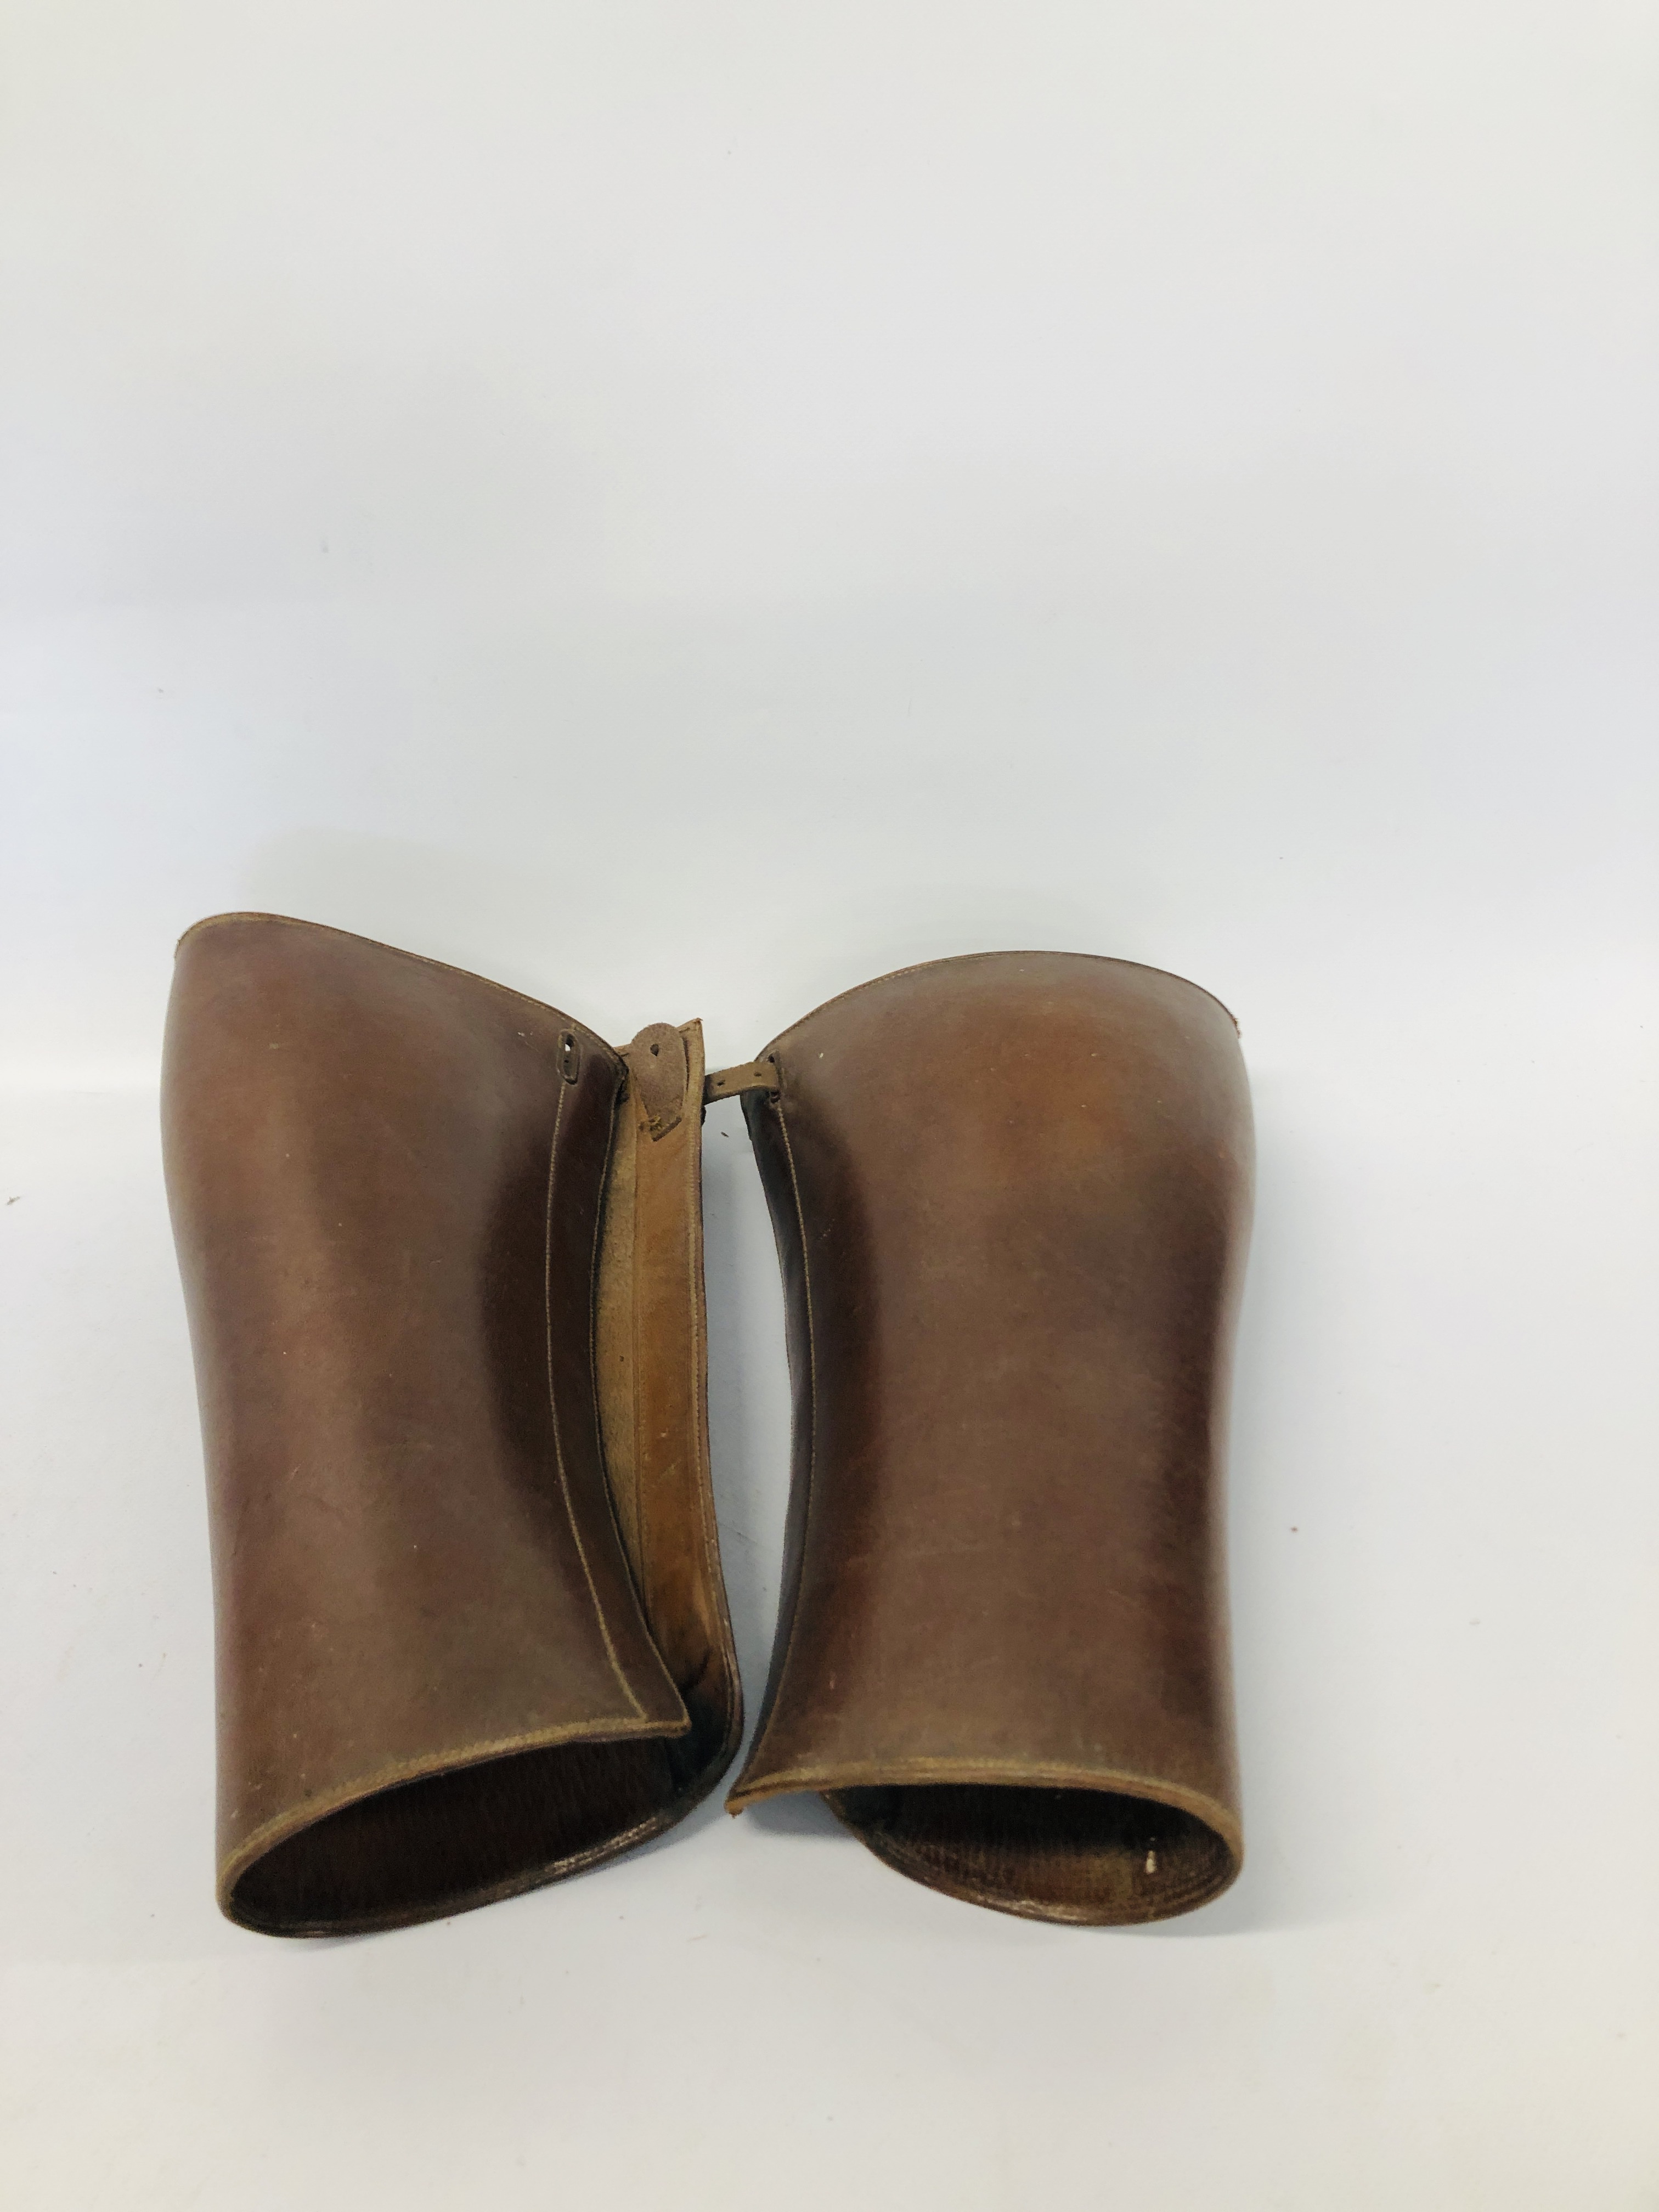 SIX PAIRS OF LEATHER BUSKINS - Image 6 of 8